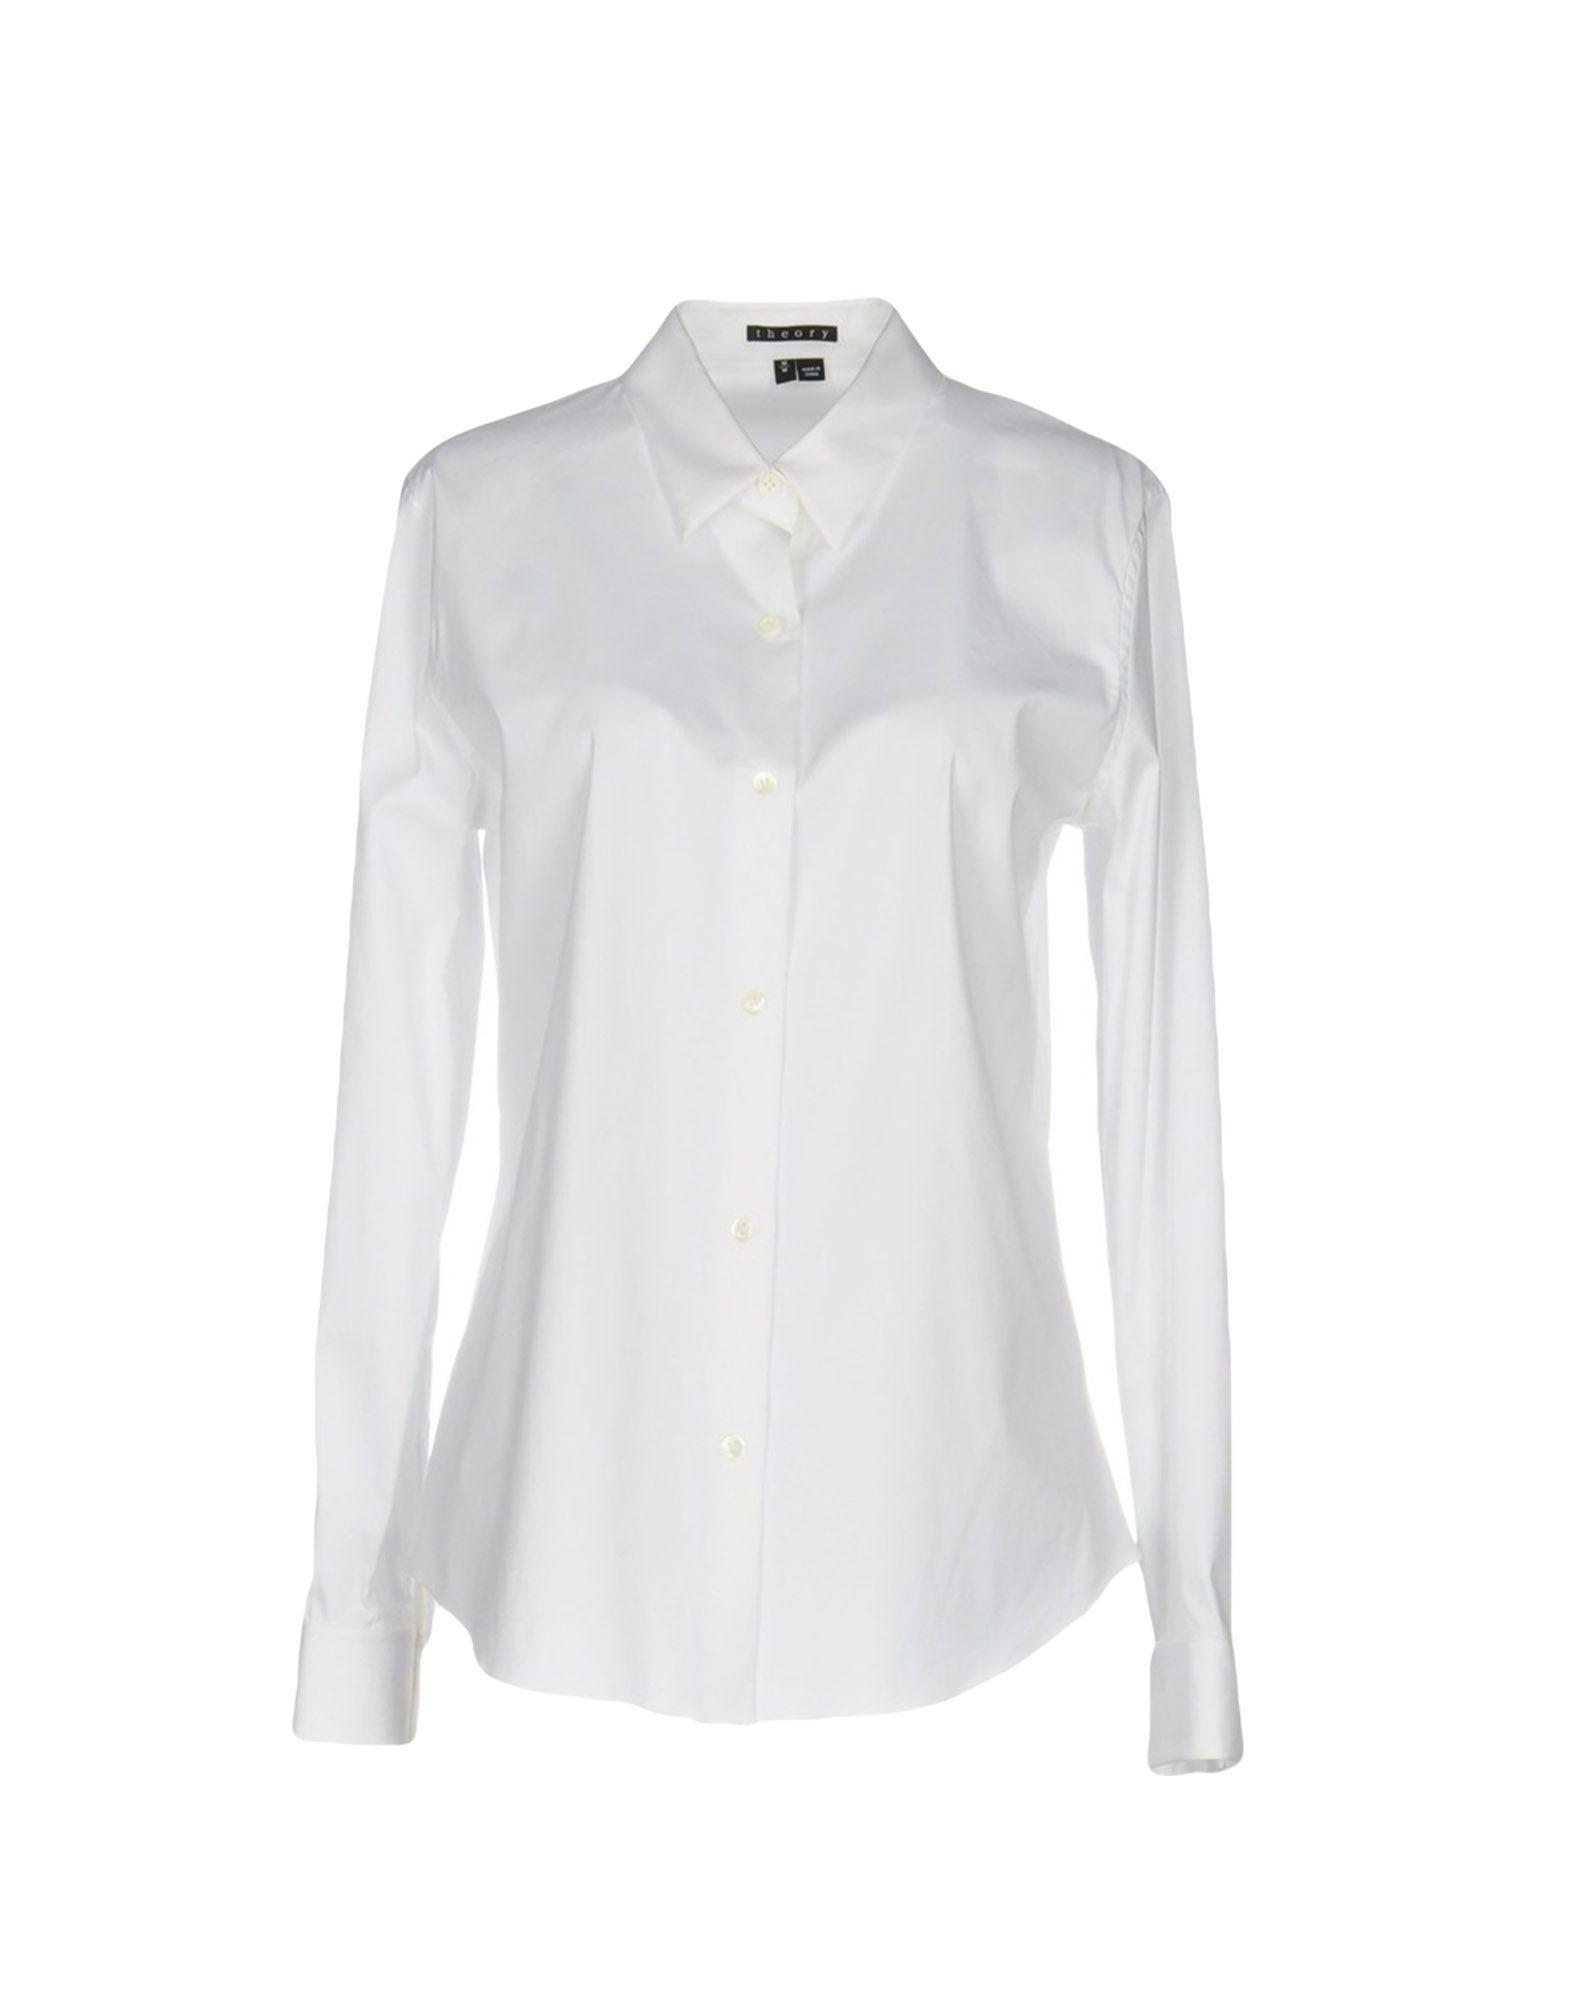 Theory Cotton Shirt in White - Lyst